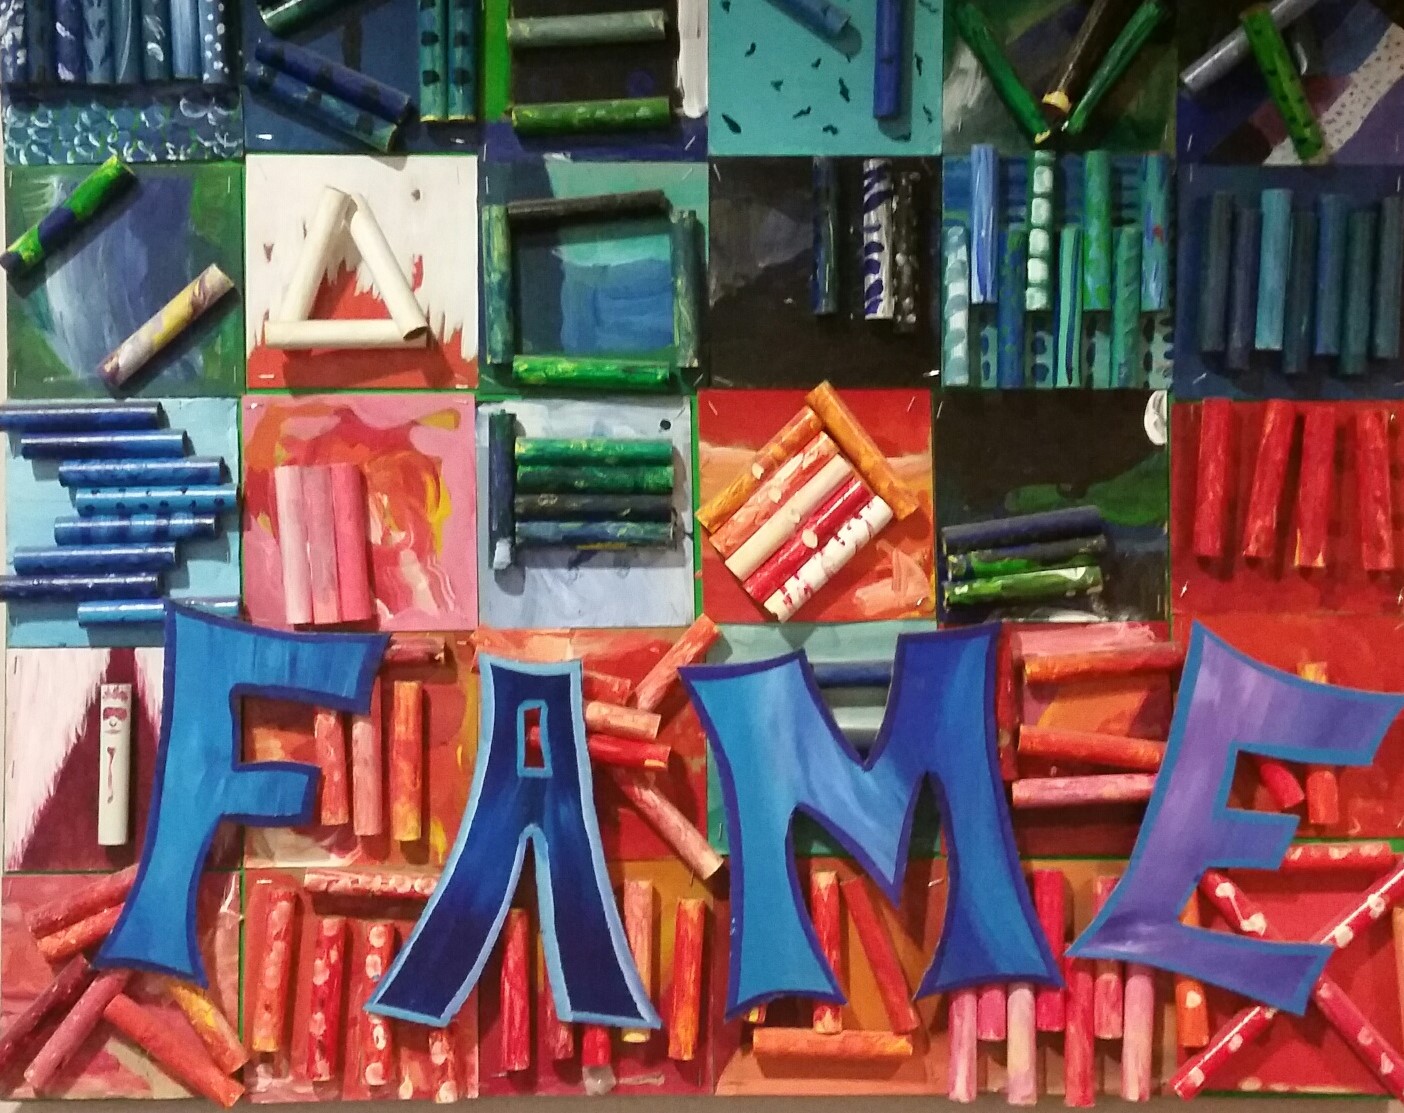 FAME sign created by kids at FAME Festival